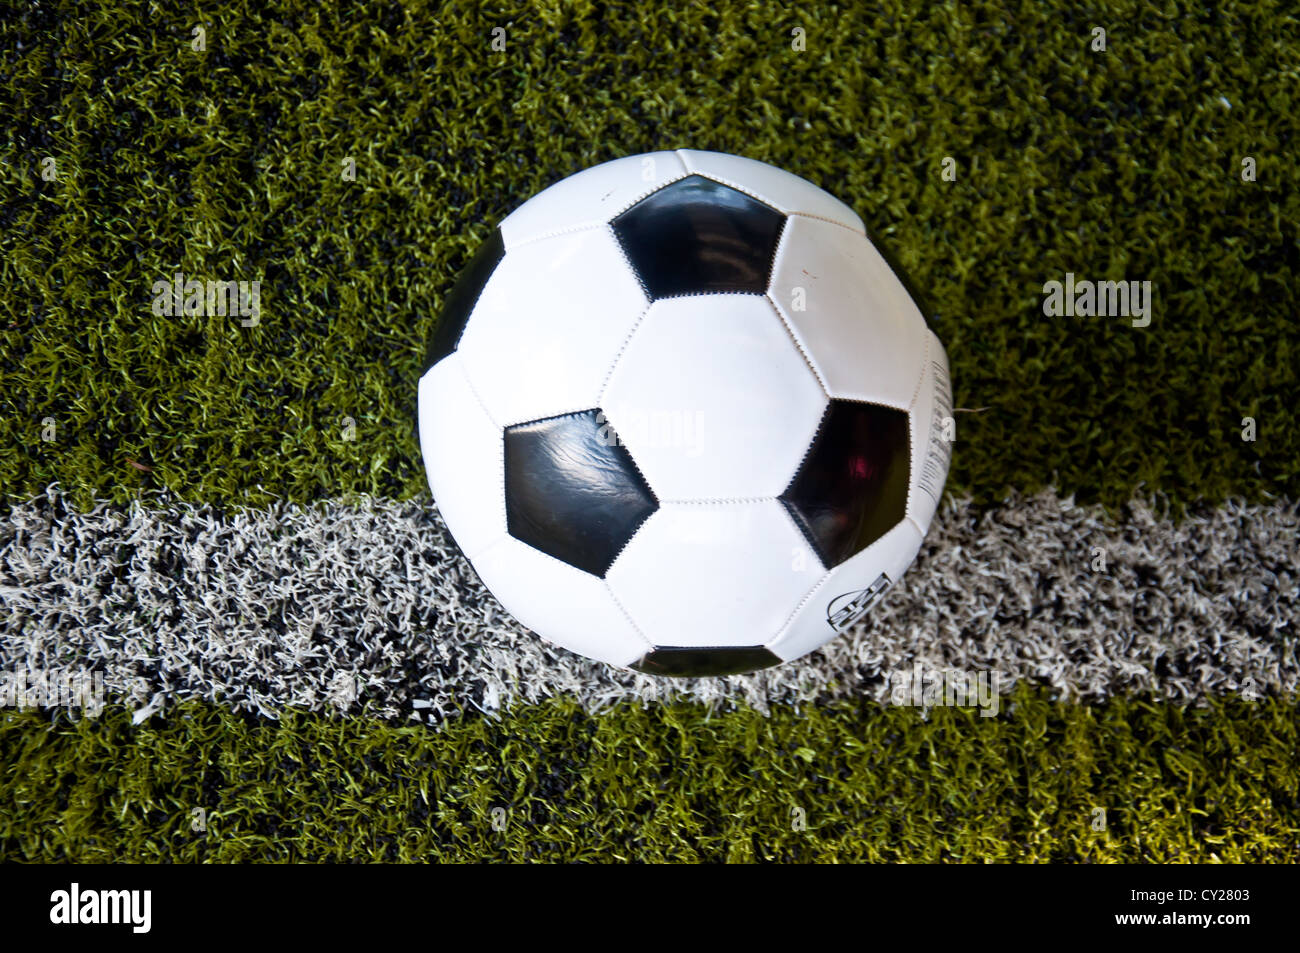 ball on white line of artificial grass indoor football field Stock Photo